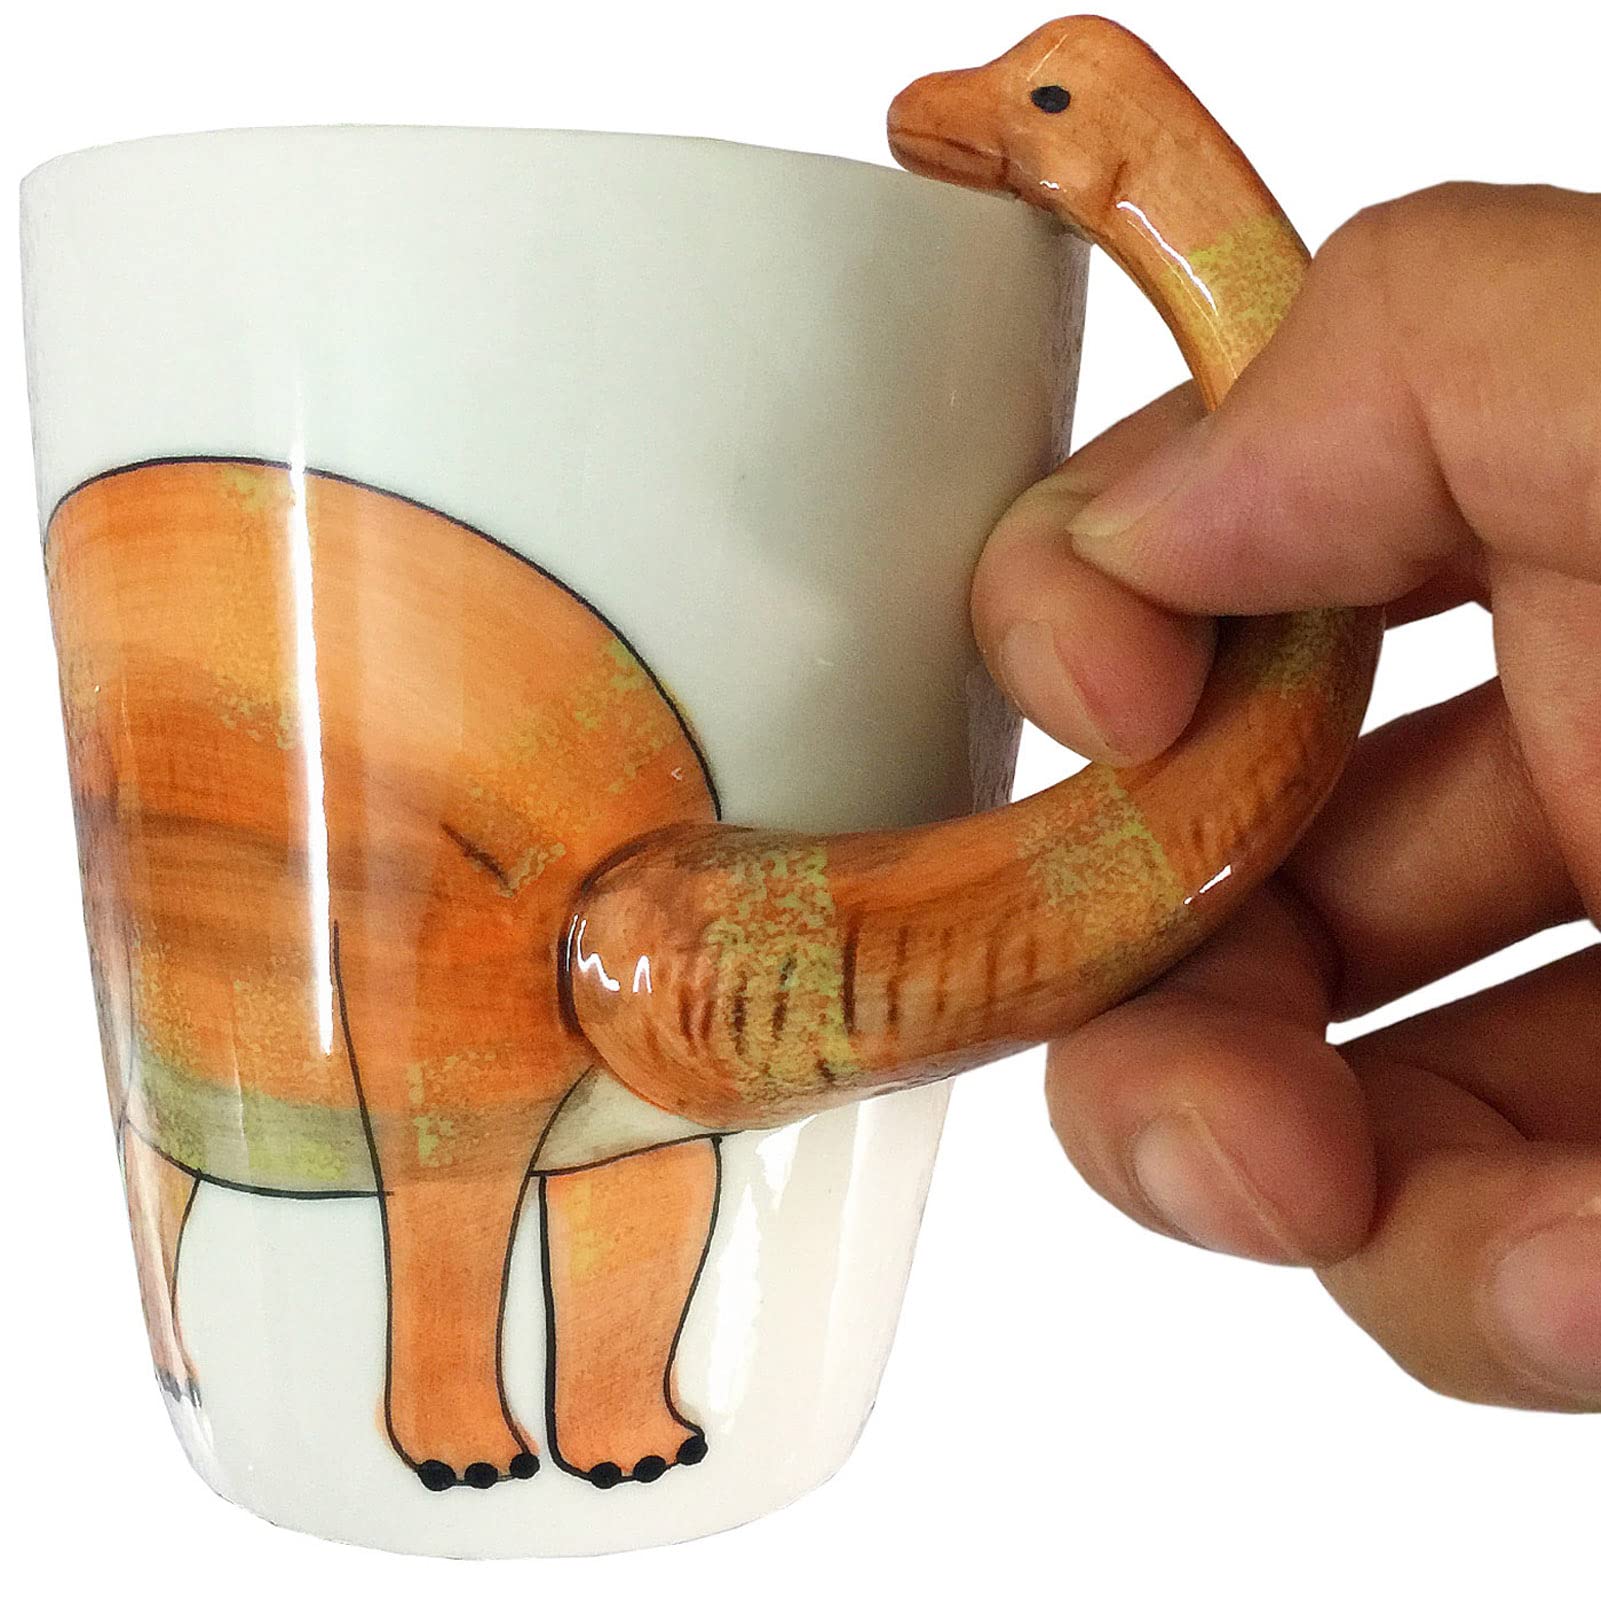 luckyse Dinosaur 3D Ceramic Mug, Long necked dragon Handle Novelty Animal Cup Gift for Christmas, Thanksgiving Day, Mother's Day, Father's Day (Dinosaur)